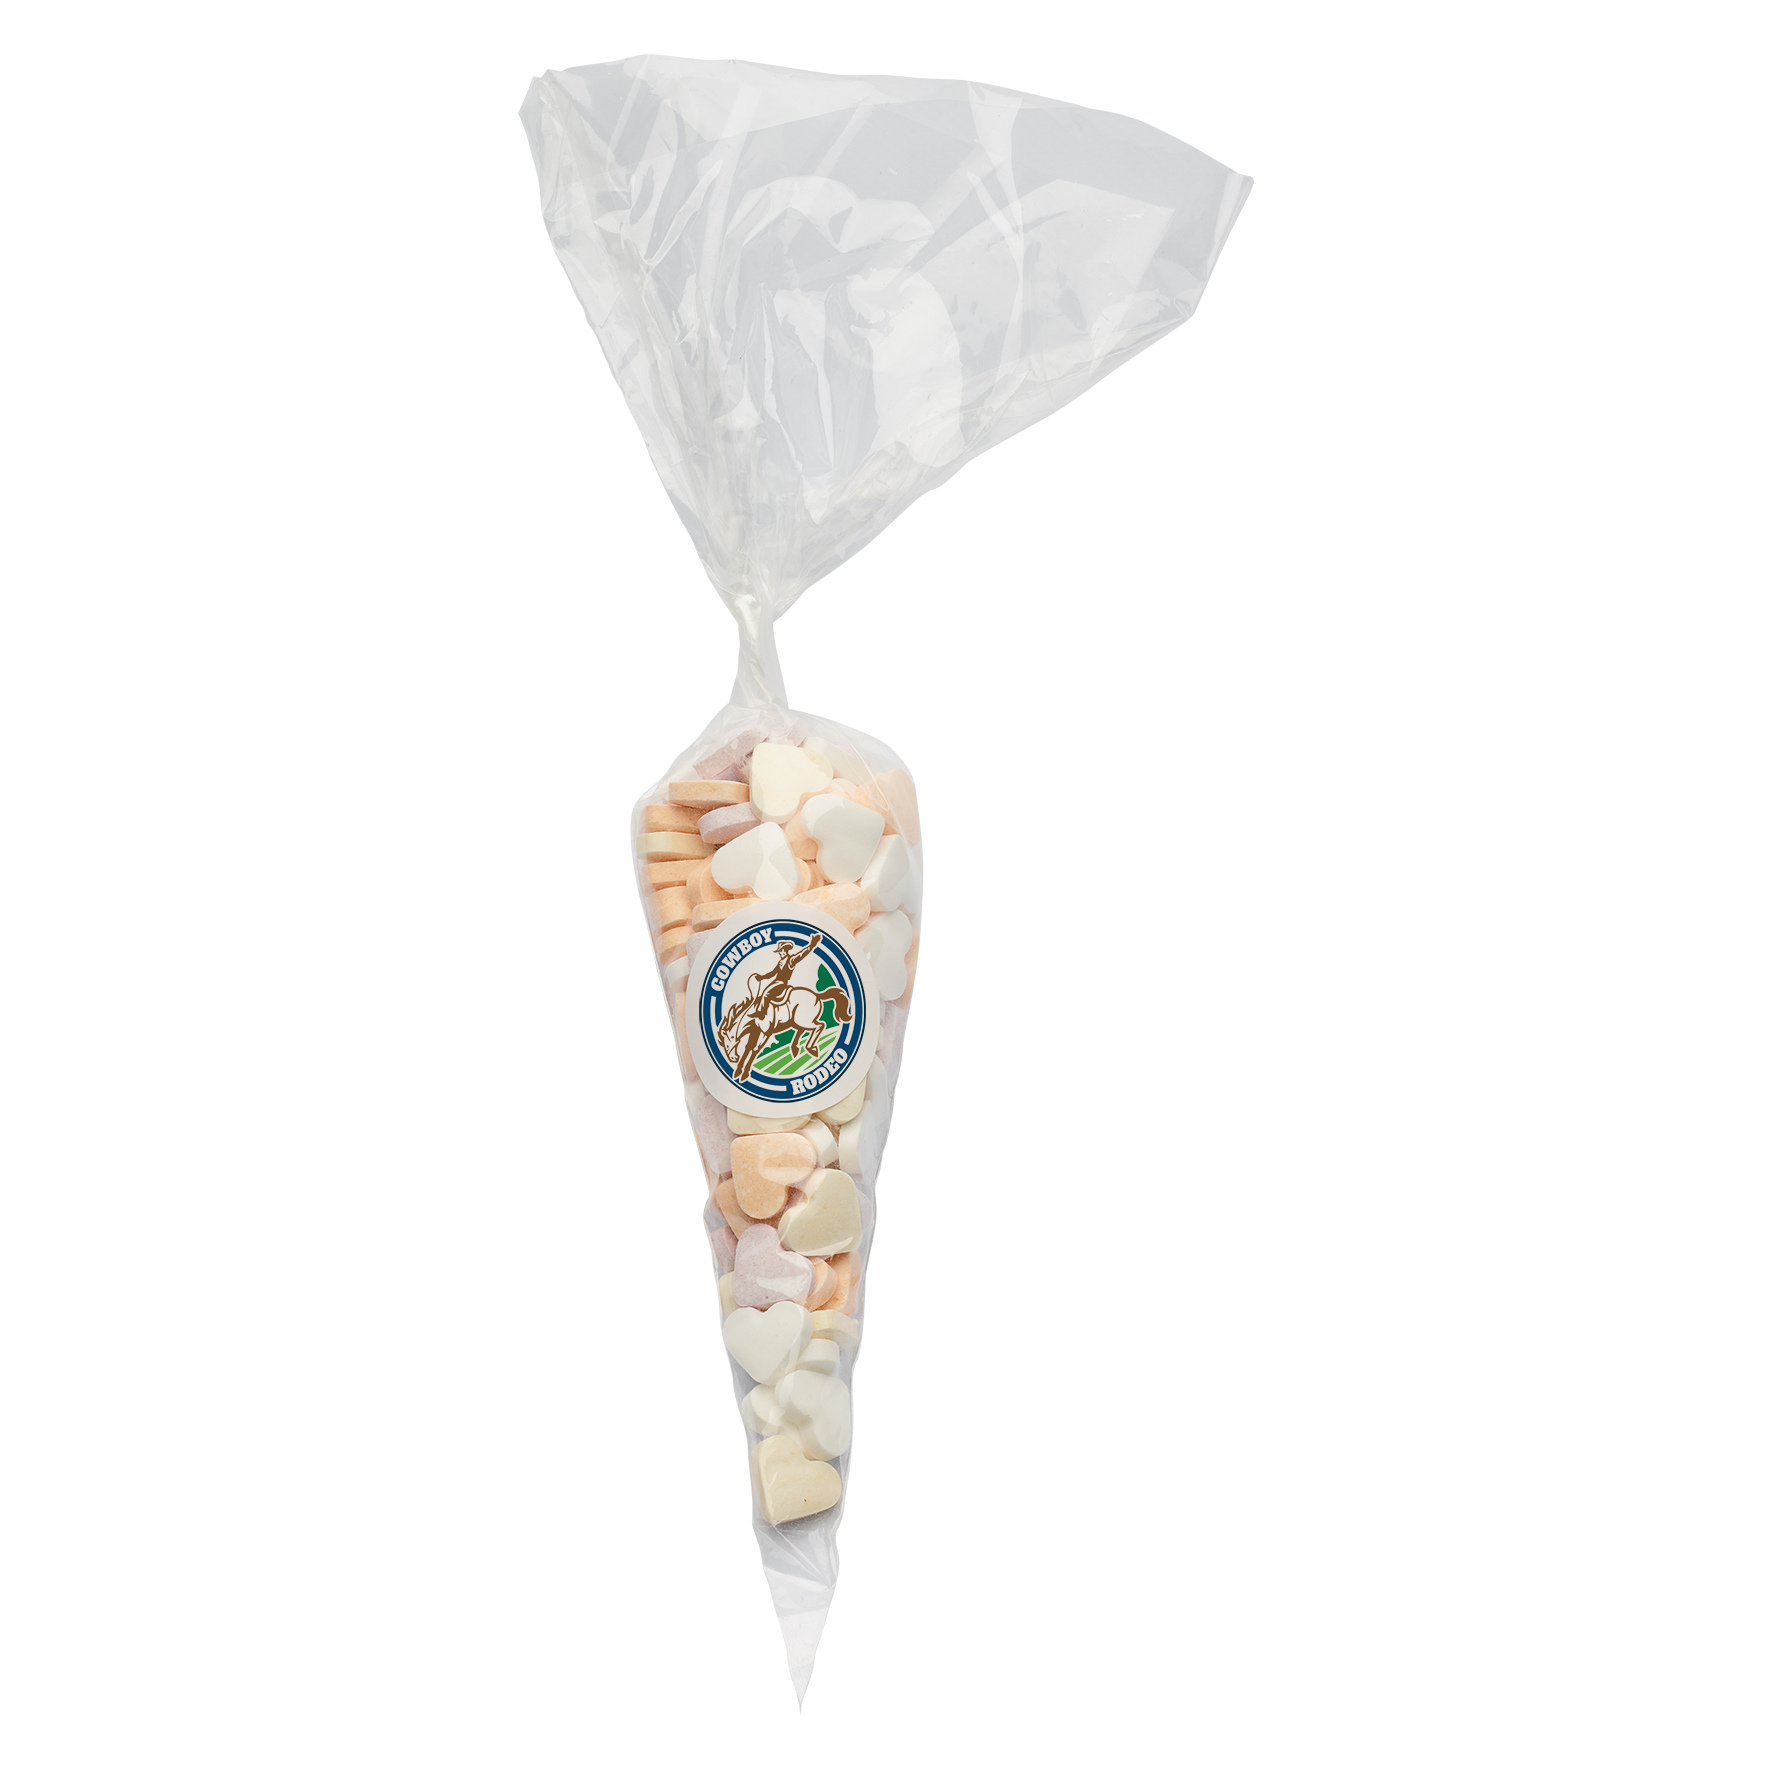 c 0604hs 00 09 - Sweet cones with extra strong mints (240g)